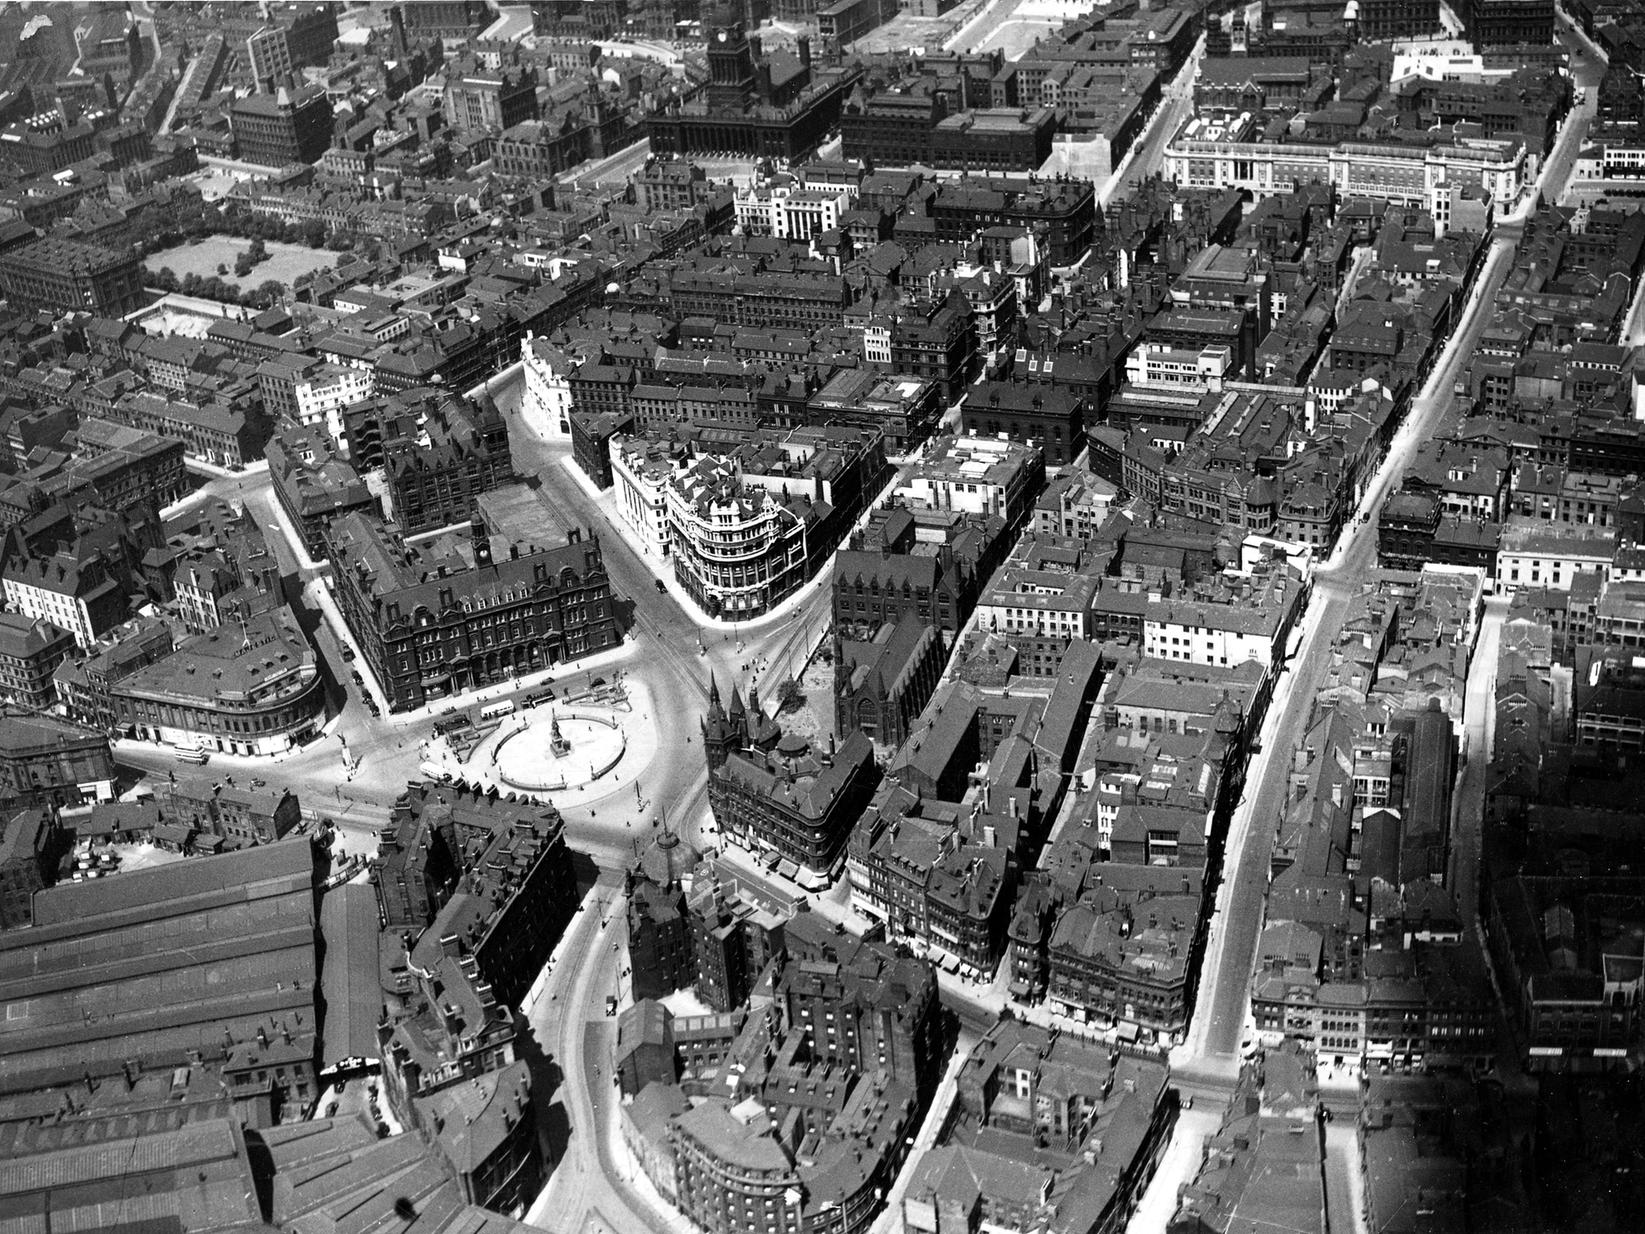 Pictured at the bottom left of this photo. It combined with Leeds New in 1938 to create Leeds City,